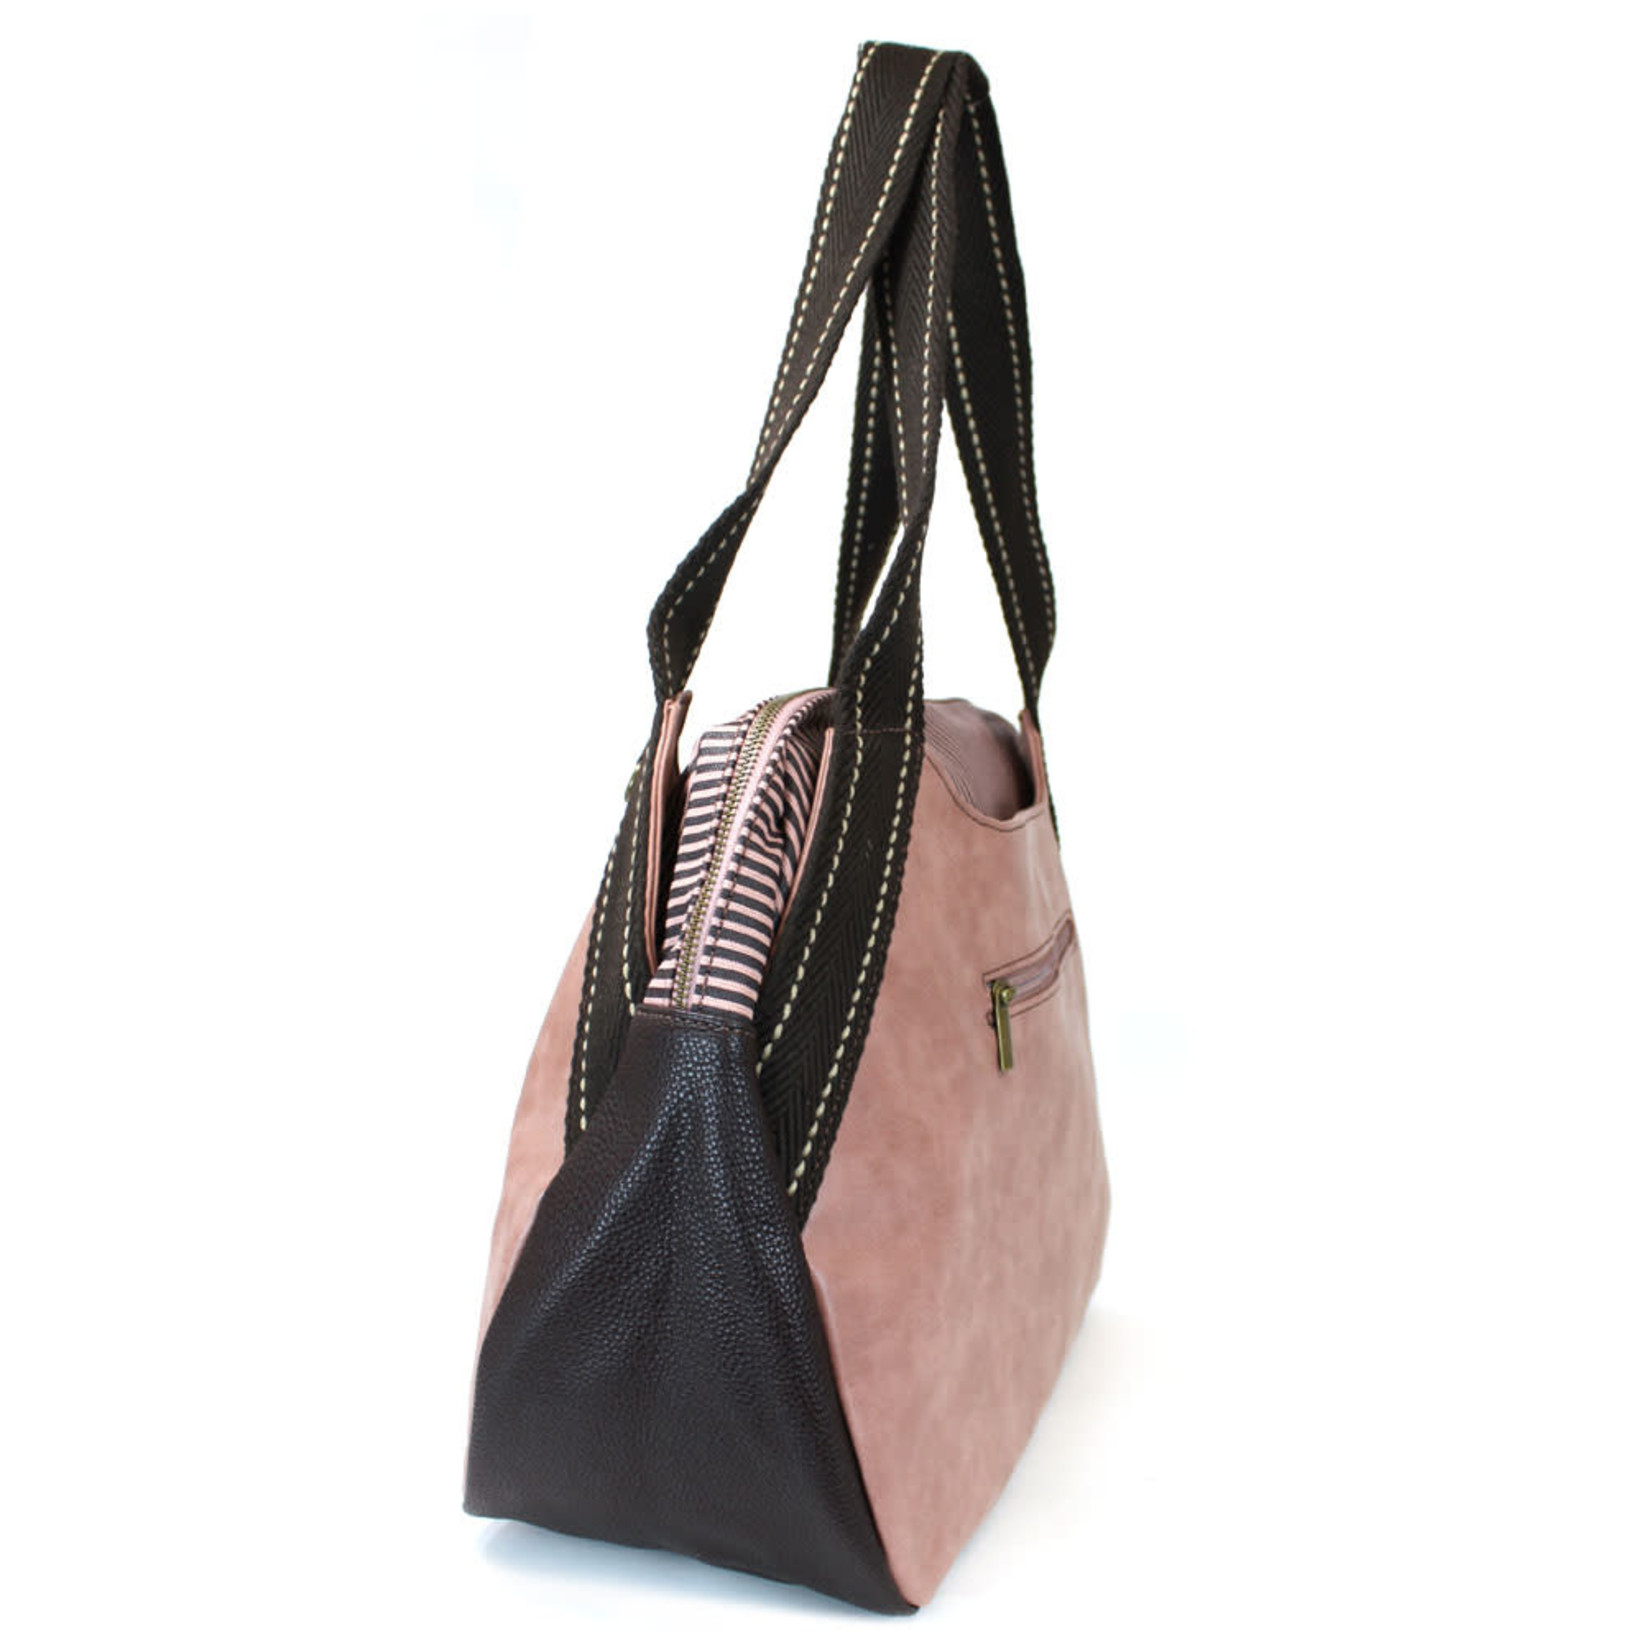 Chala Bowling Bag - Forget Me Not - Dusty Rose